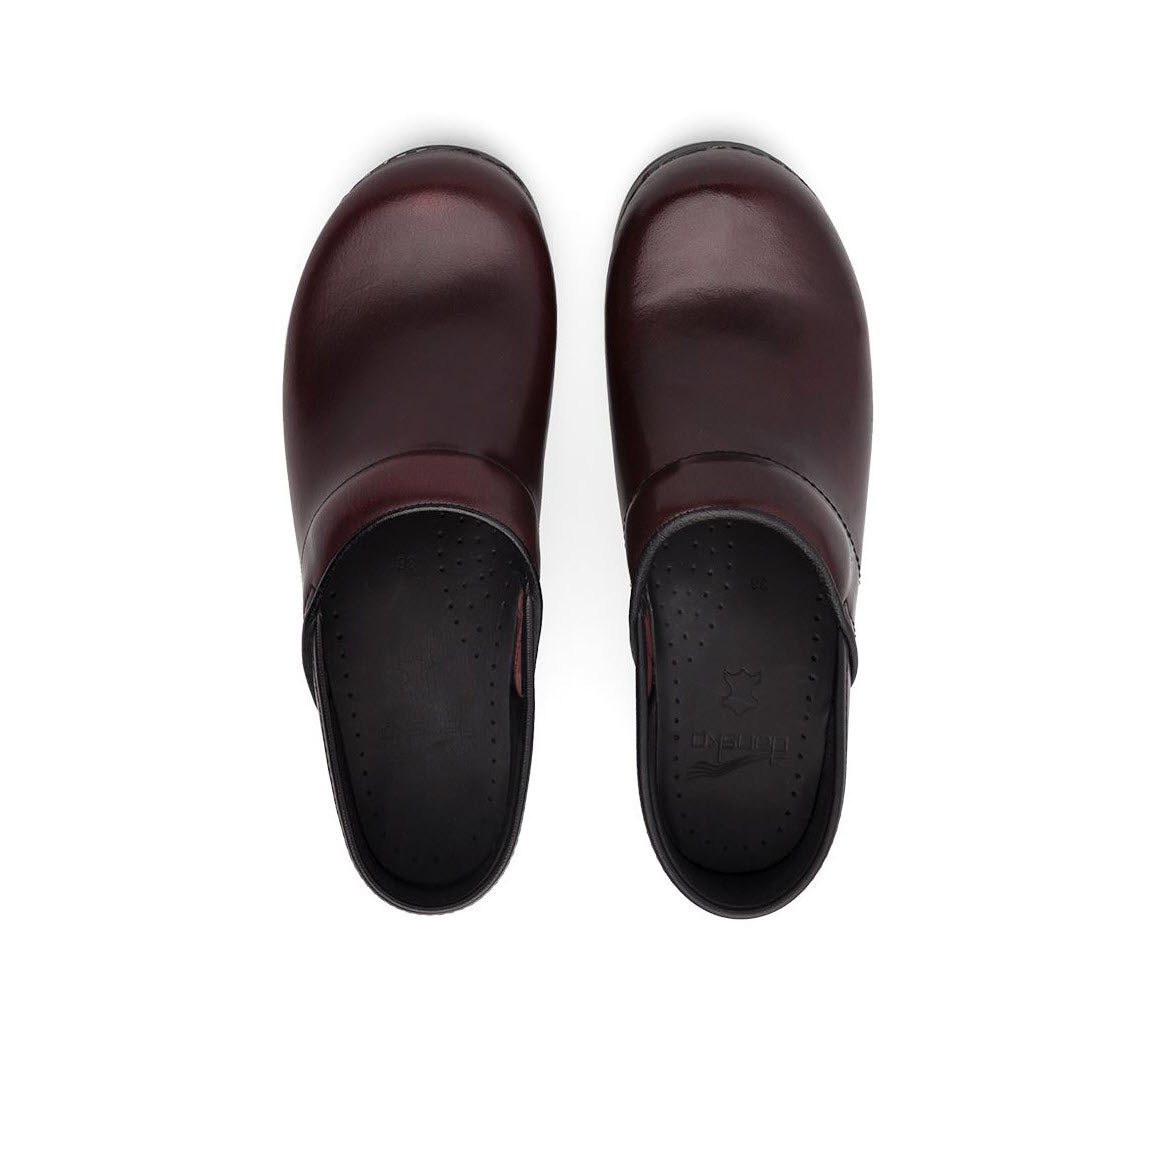 A pair of dark red Dansko Professional Cordovan Cabrio clogs viewed from above on a white background.